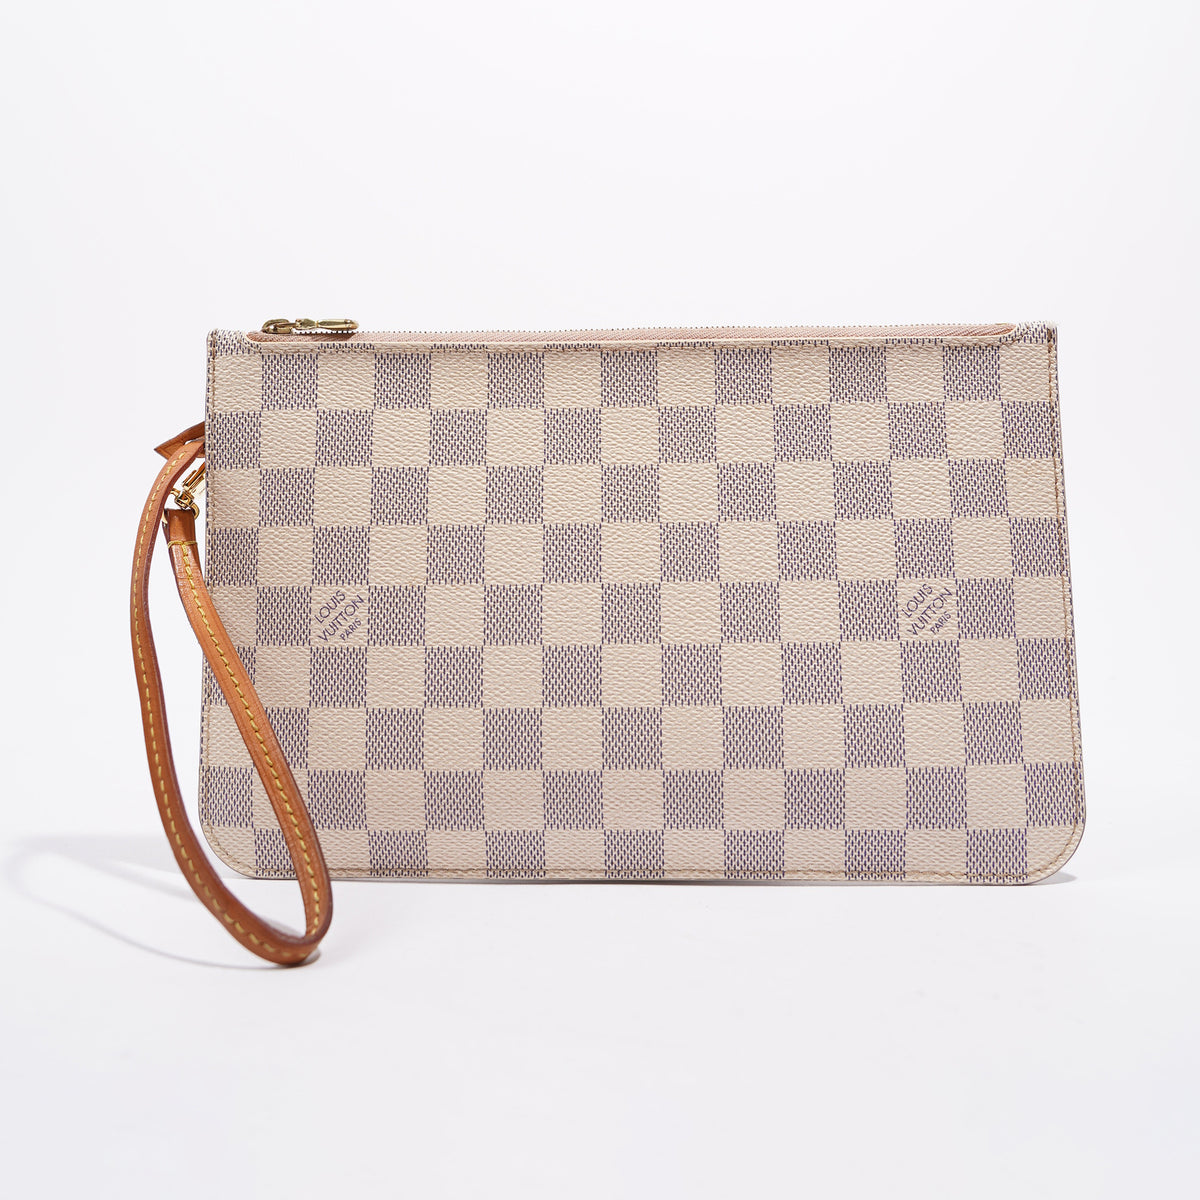 Louis Vuitton  Louis vuitton suitcase, Louis vuitton luggage, Louis vuitton  bag neverfull